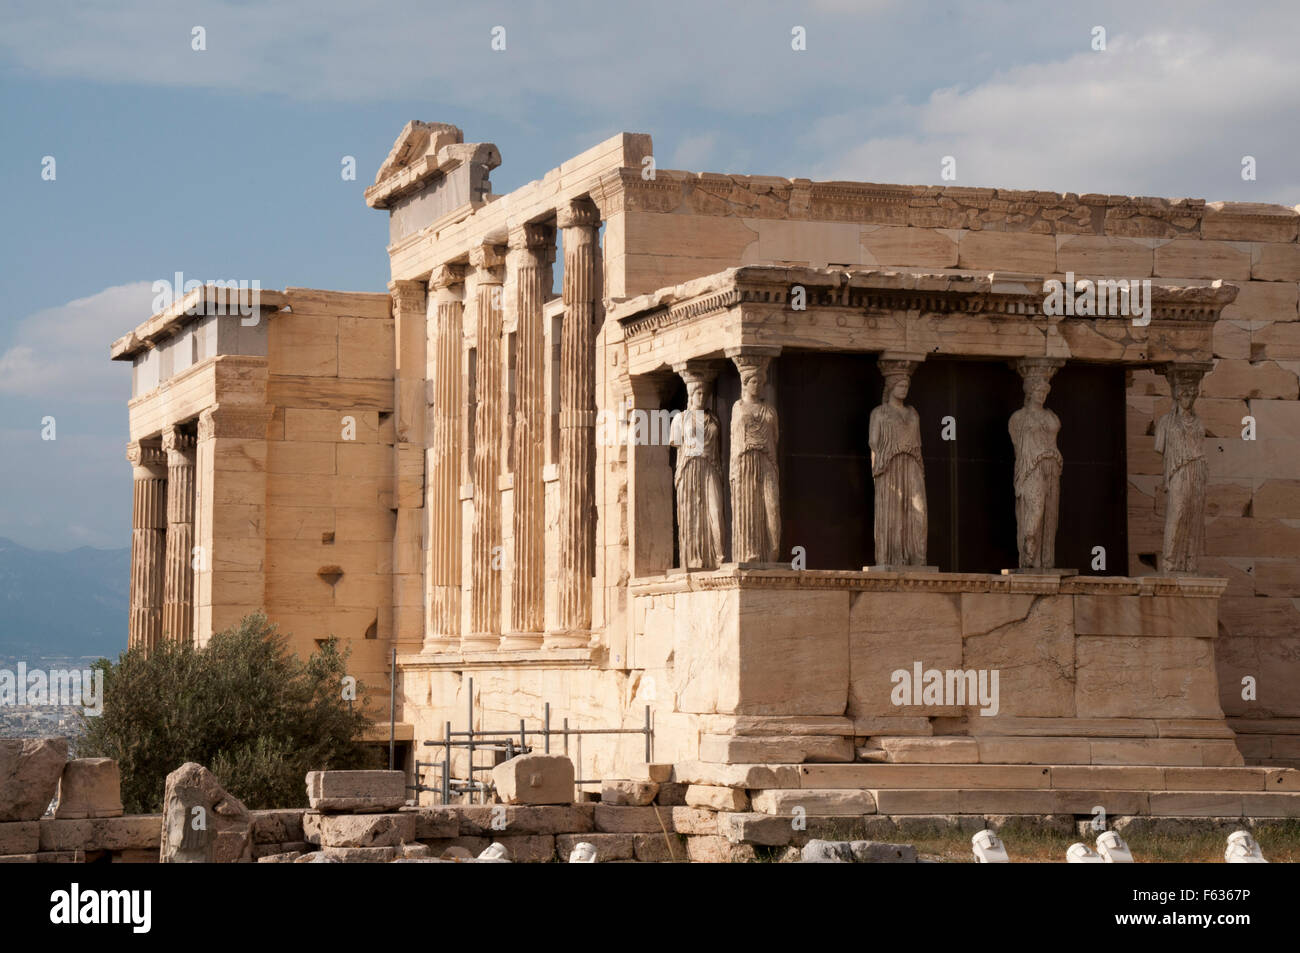 The Erechtheion is an ancient Greek temple built between 421 and 406 BC on the north side of the Acropolis of Athens. Stock Photo